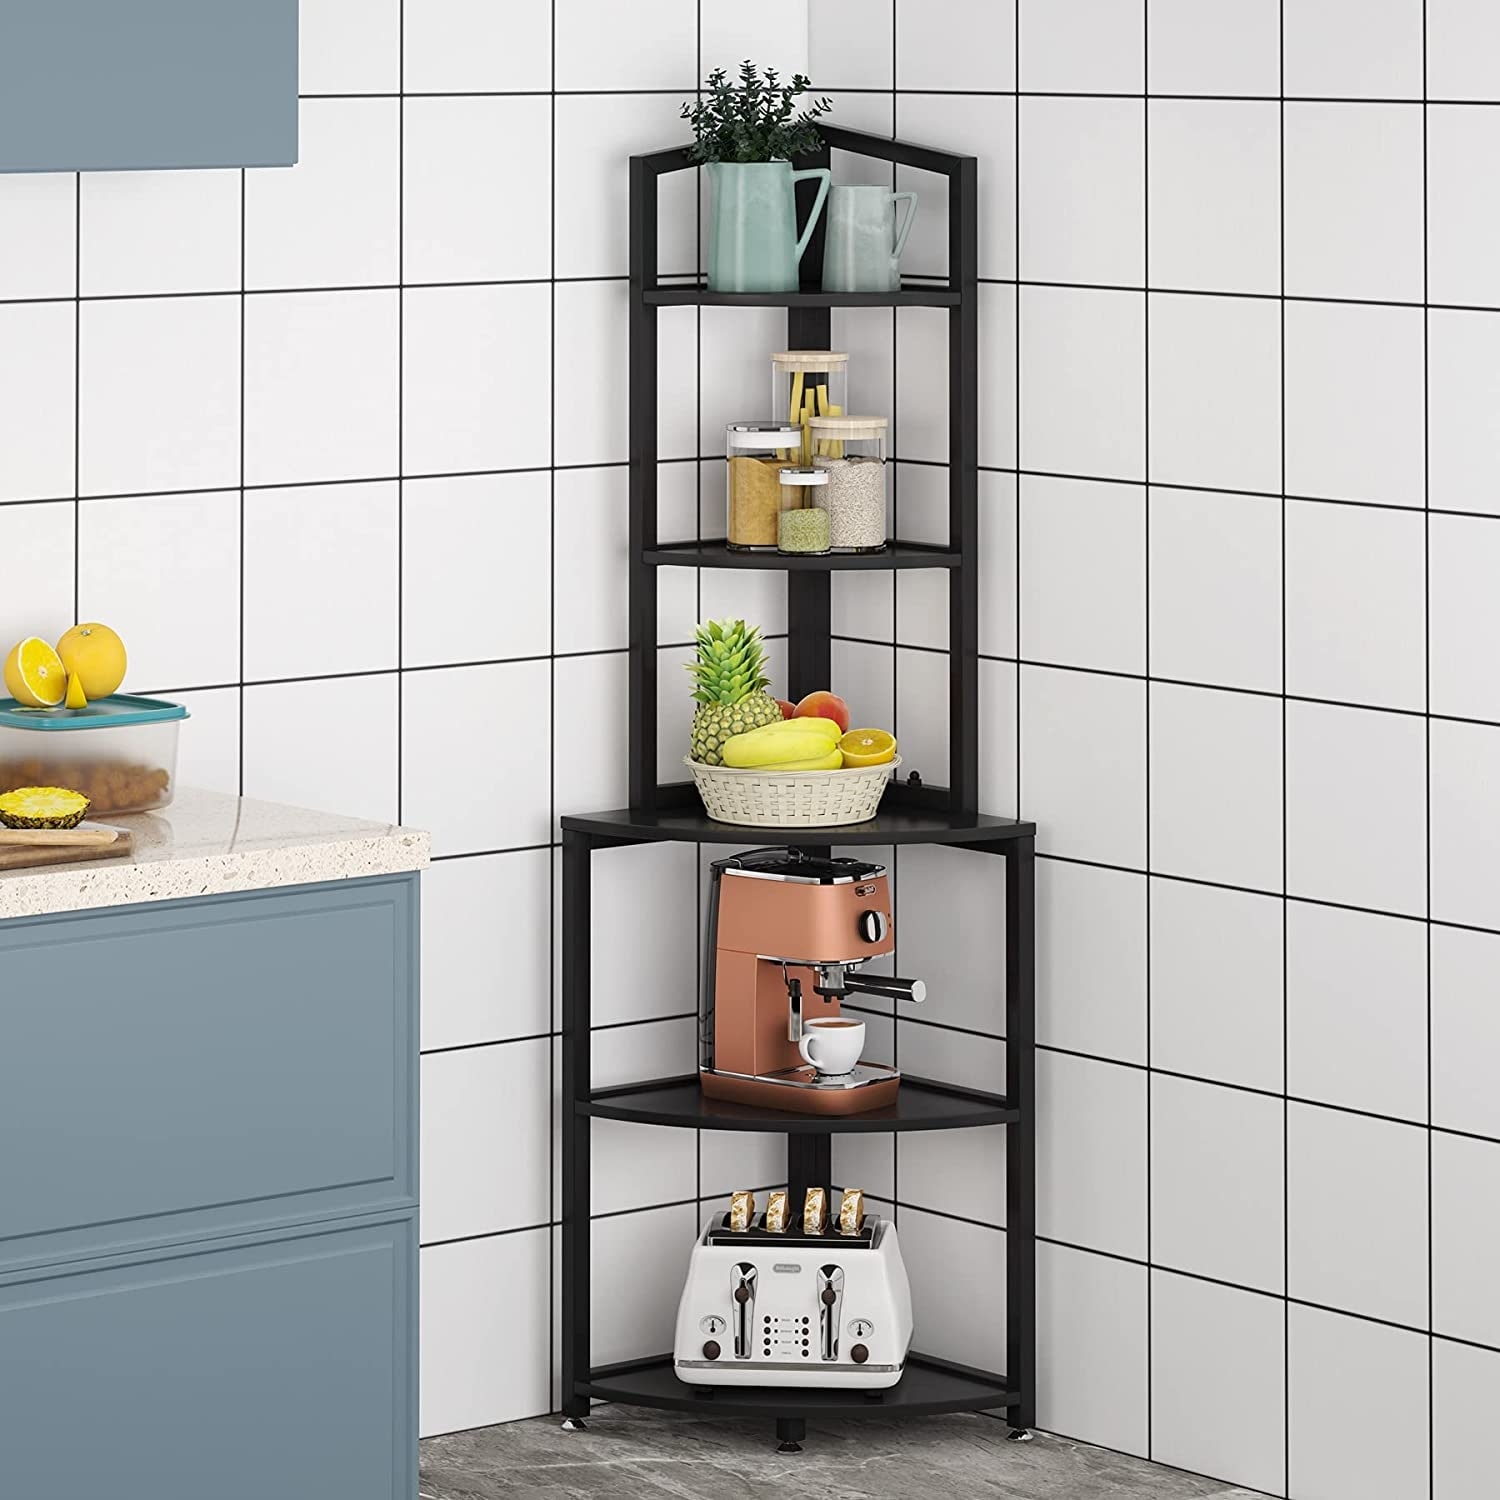 https://ak1.ostkcdn.com/images/products/is/images/direct/673beb239e7f145bc4f9405412cb7d6306ade39c/5-Tier-Corner-Shelf%2C-60-Inch-Bookcase-for-Living-Room%2C-Industrial-Corner-Storage-Rack-Plant-Stand-for-Home-Office.jpg